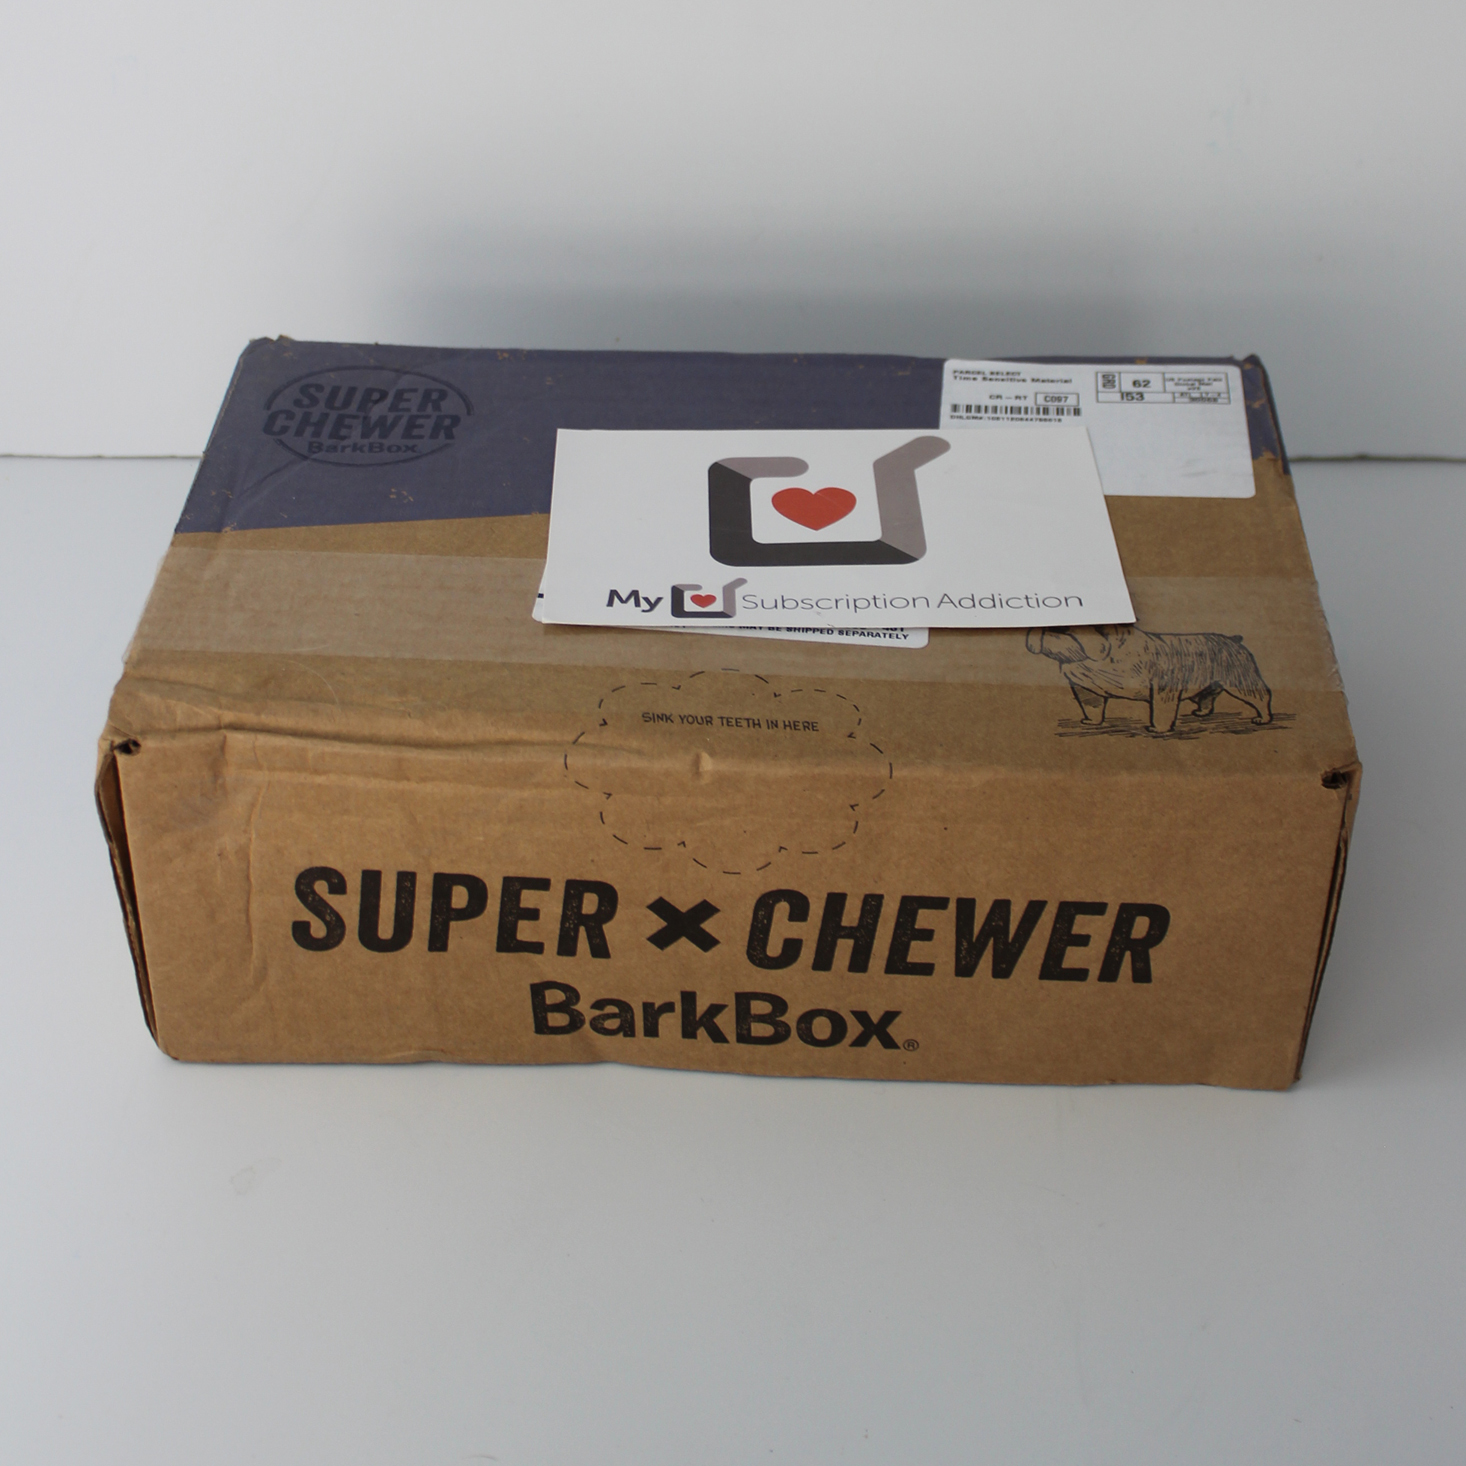 Super Chewer Box Review + Coupon – June 2018